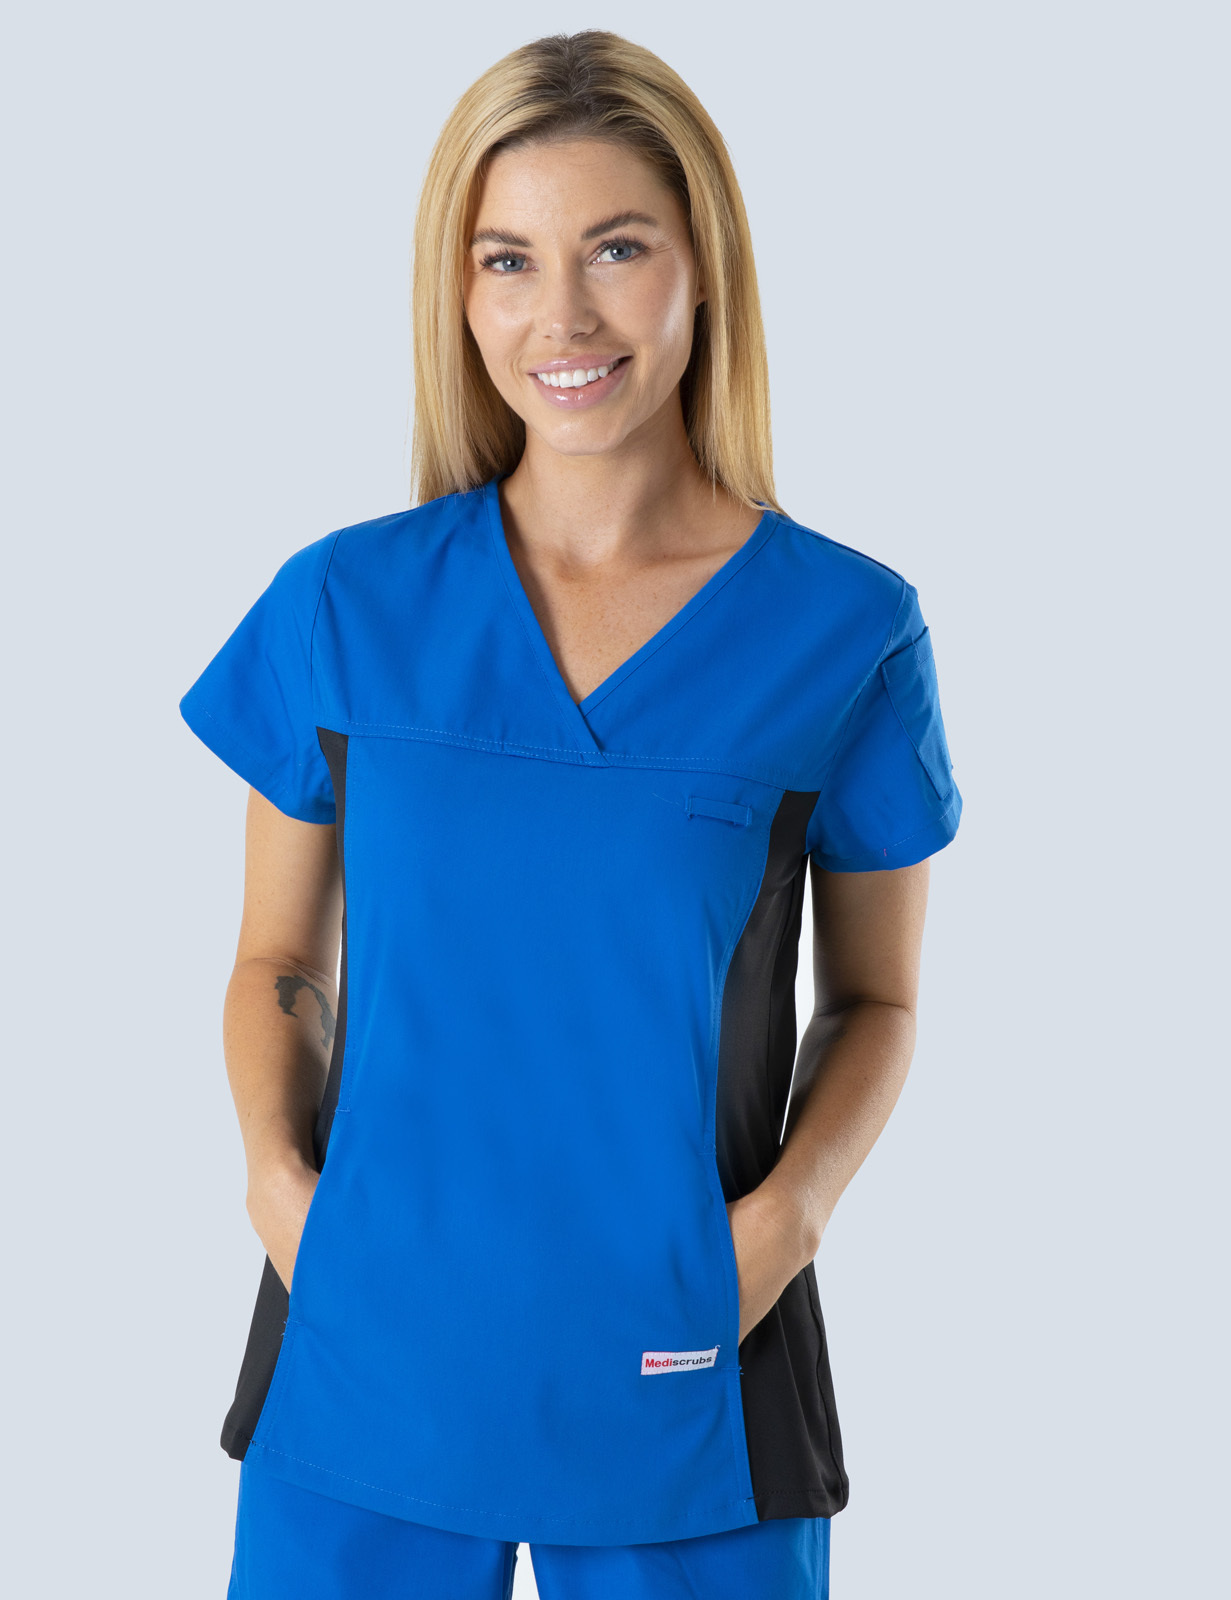 Pathology North - Mid North Coast (Women's Fit Spandex Scrub Top in Royal incl Logos)